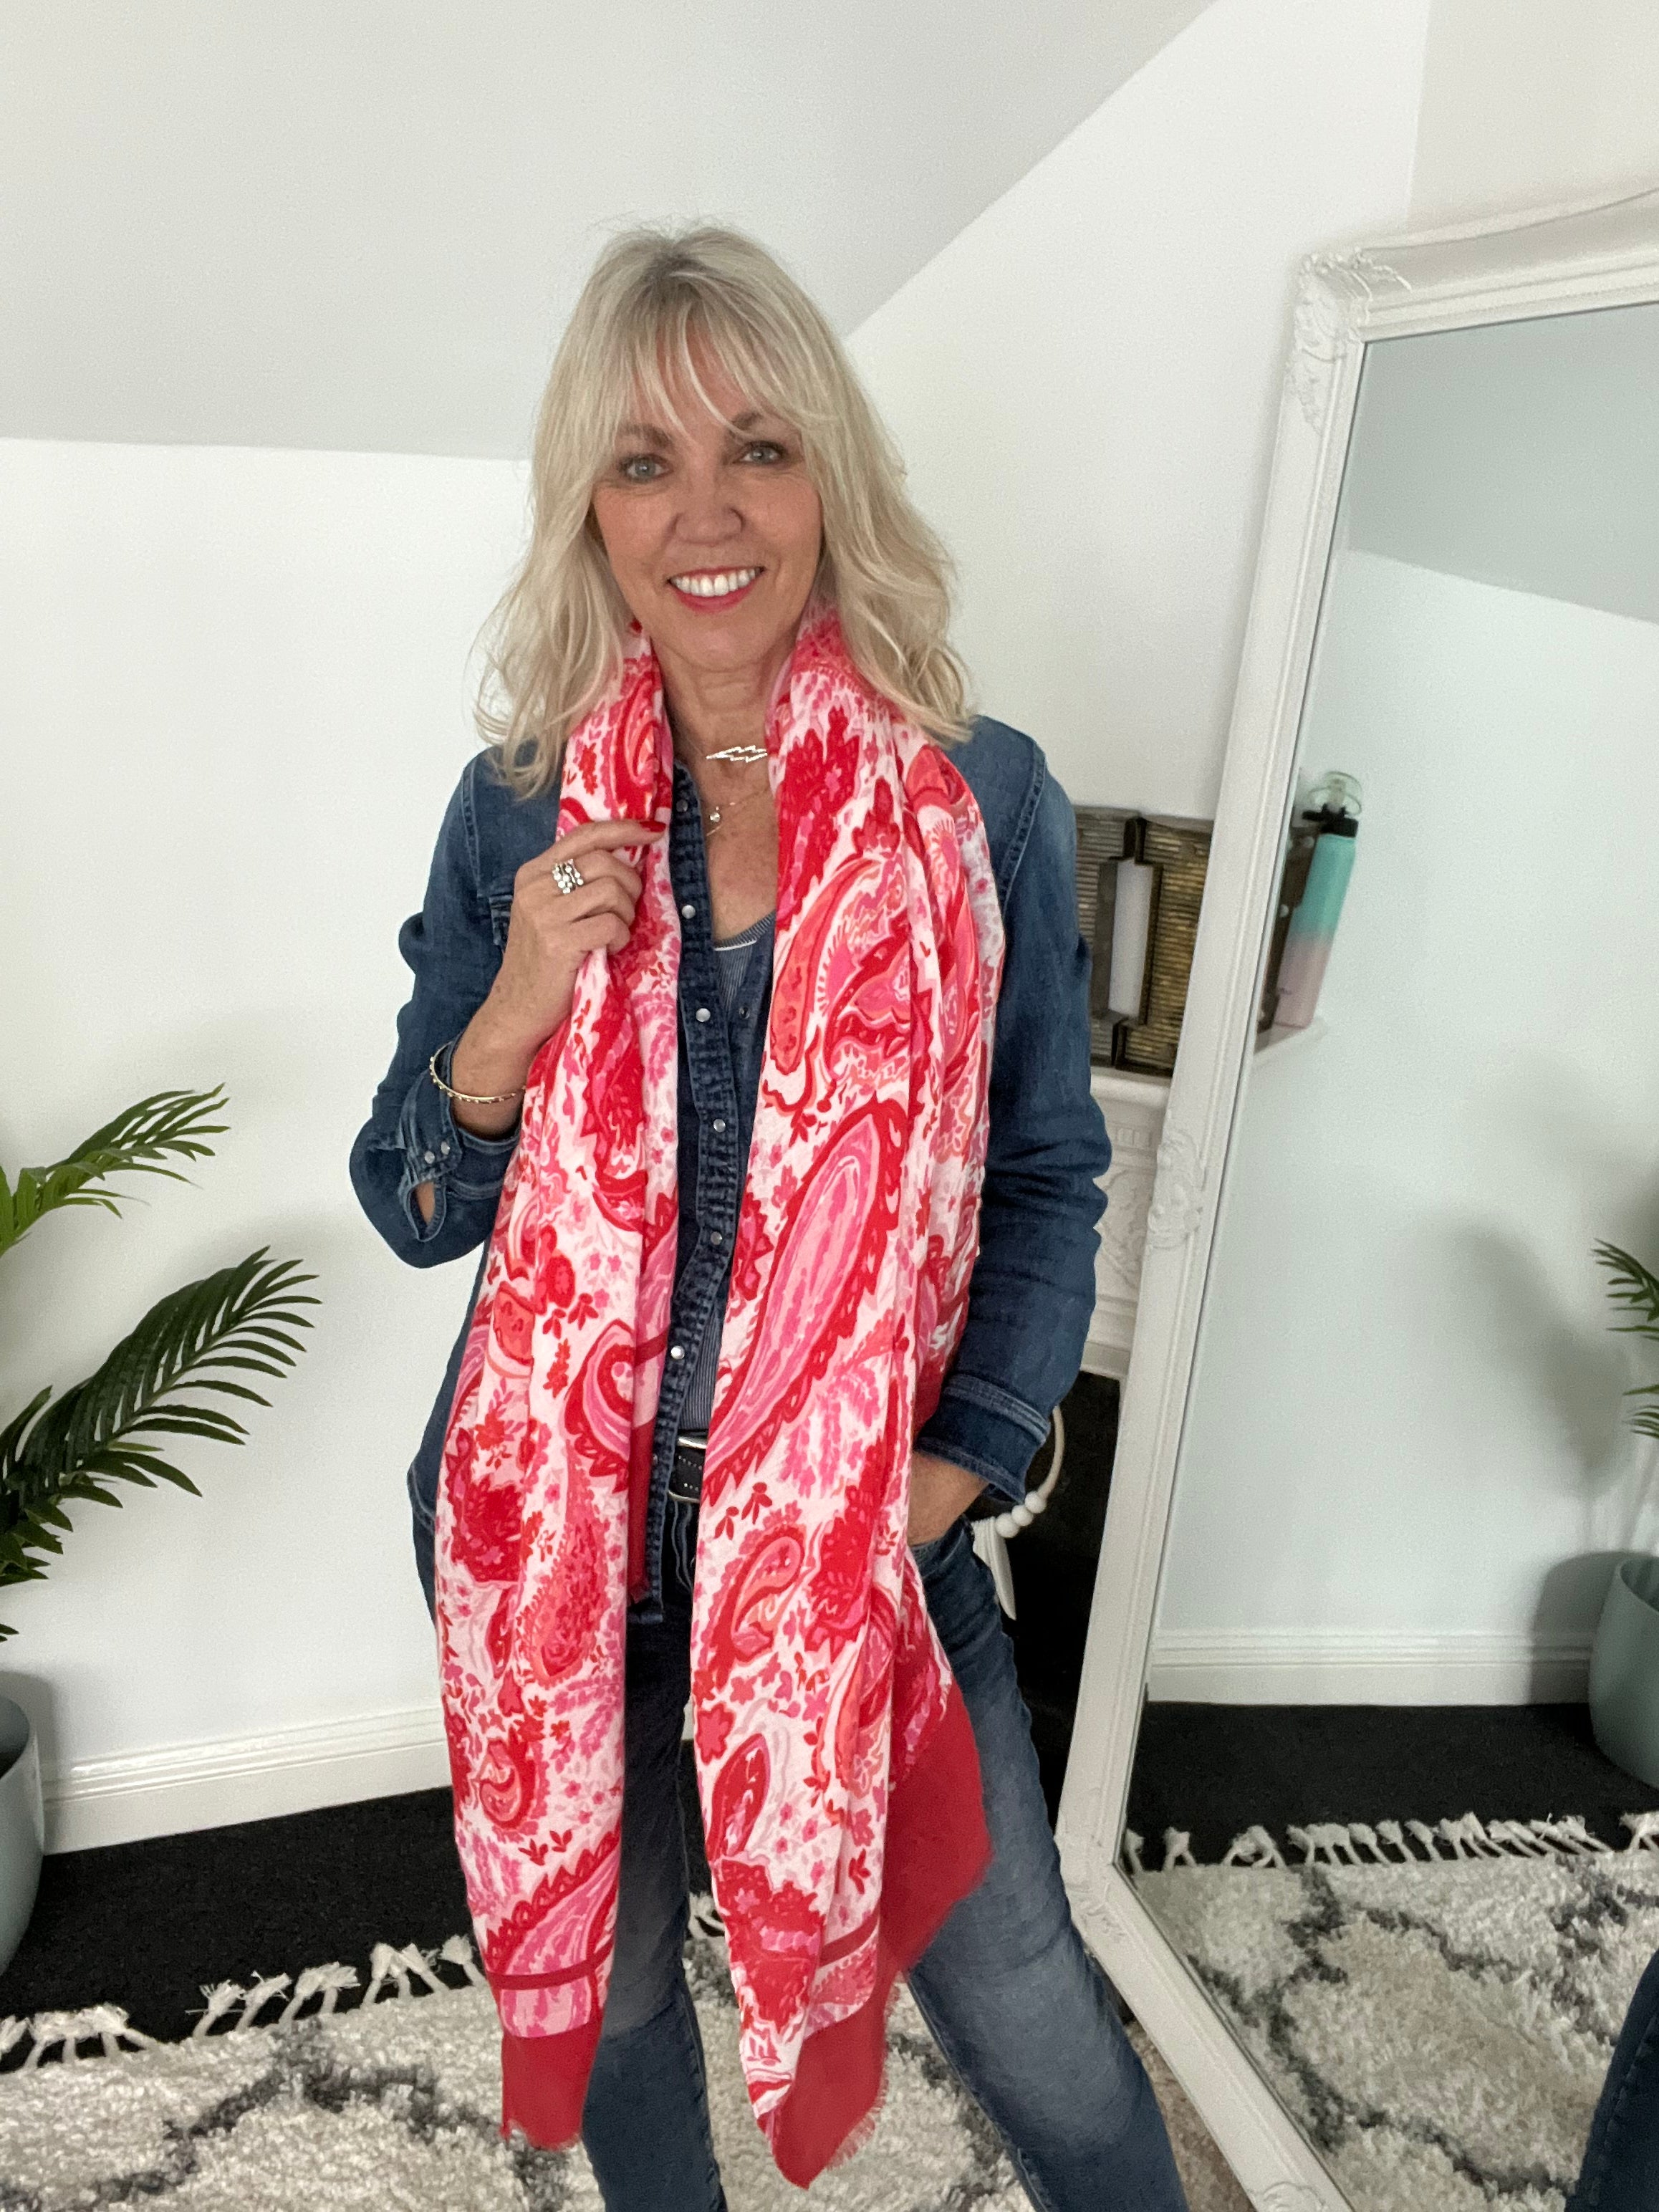 Paisley Scarf in Pink & Red